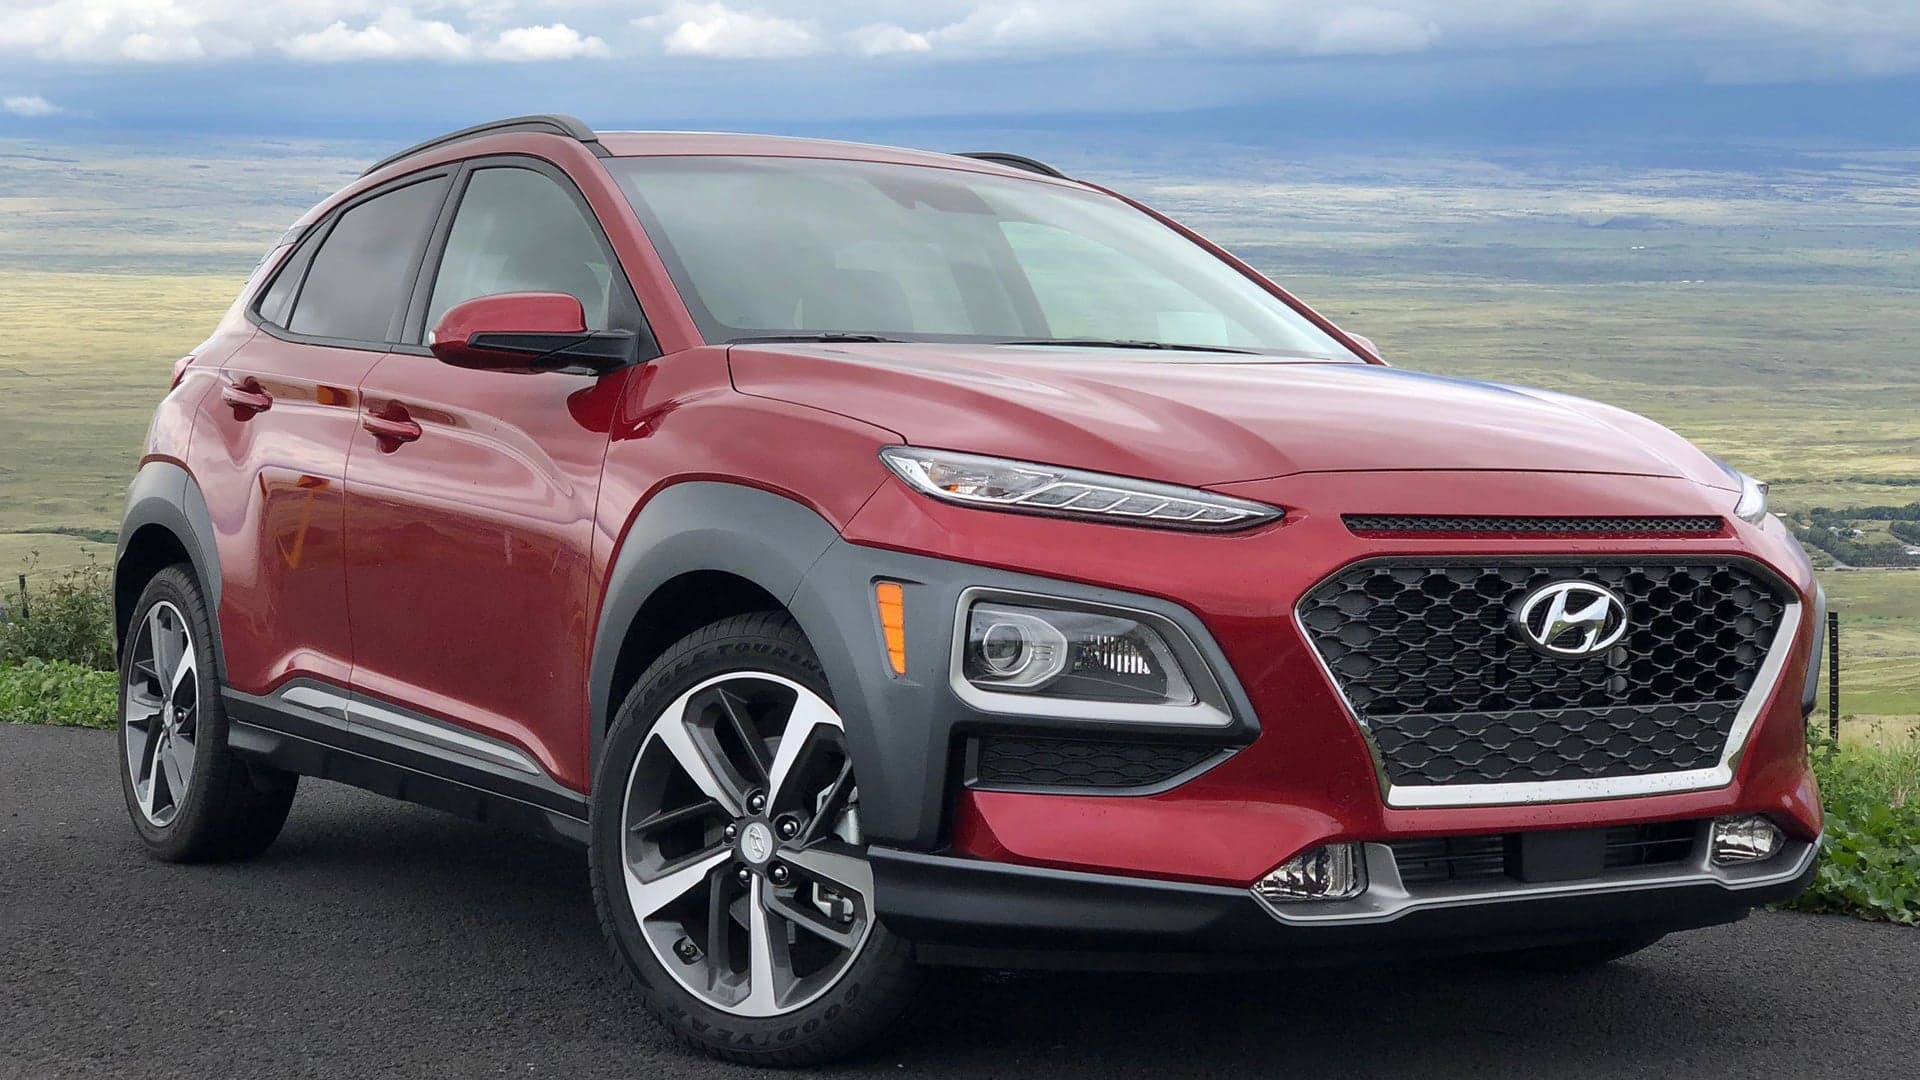 2018 Hyundai Kona First Drive: A Small Crossover With a Big Face—And Big Potential